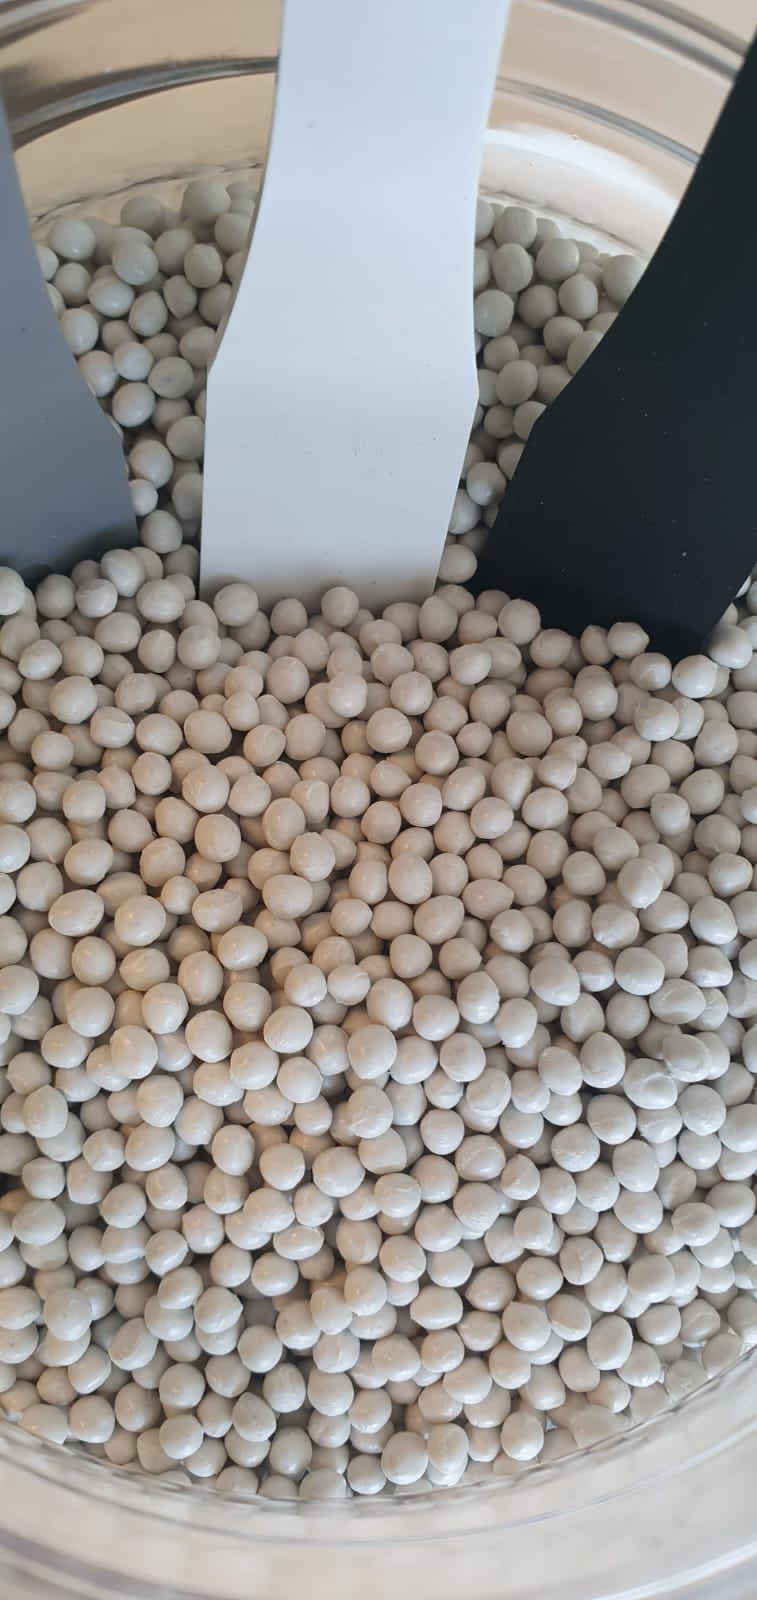 High Impact Polystyrene - PS Regranulate In Jersey